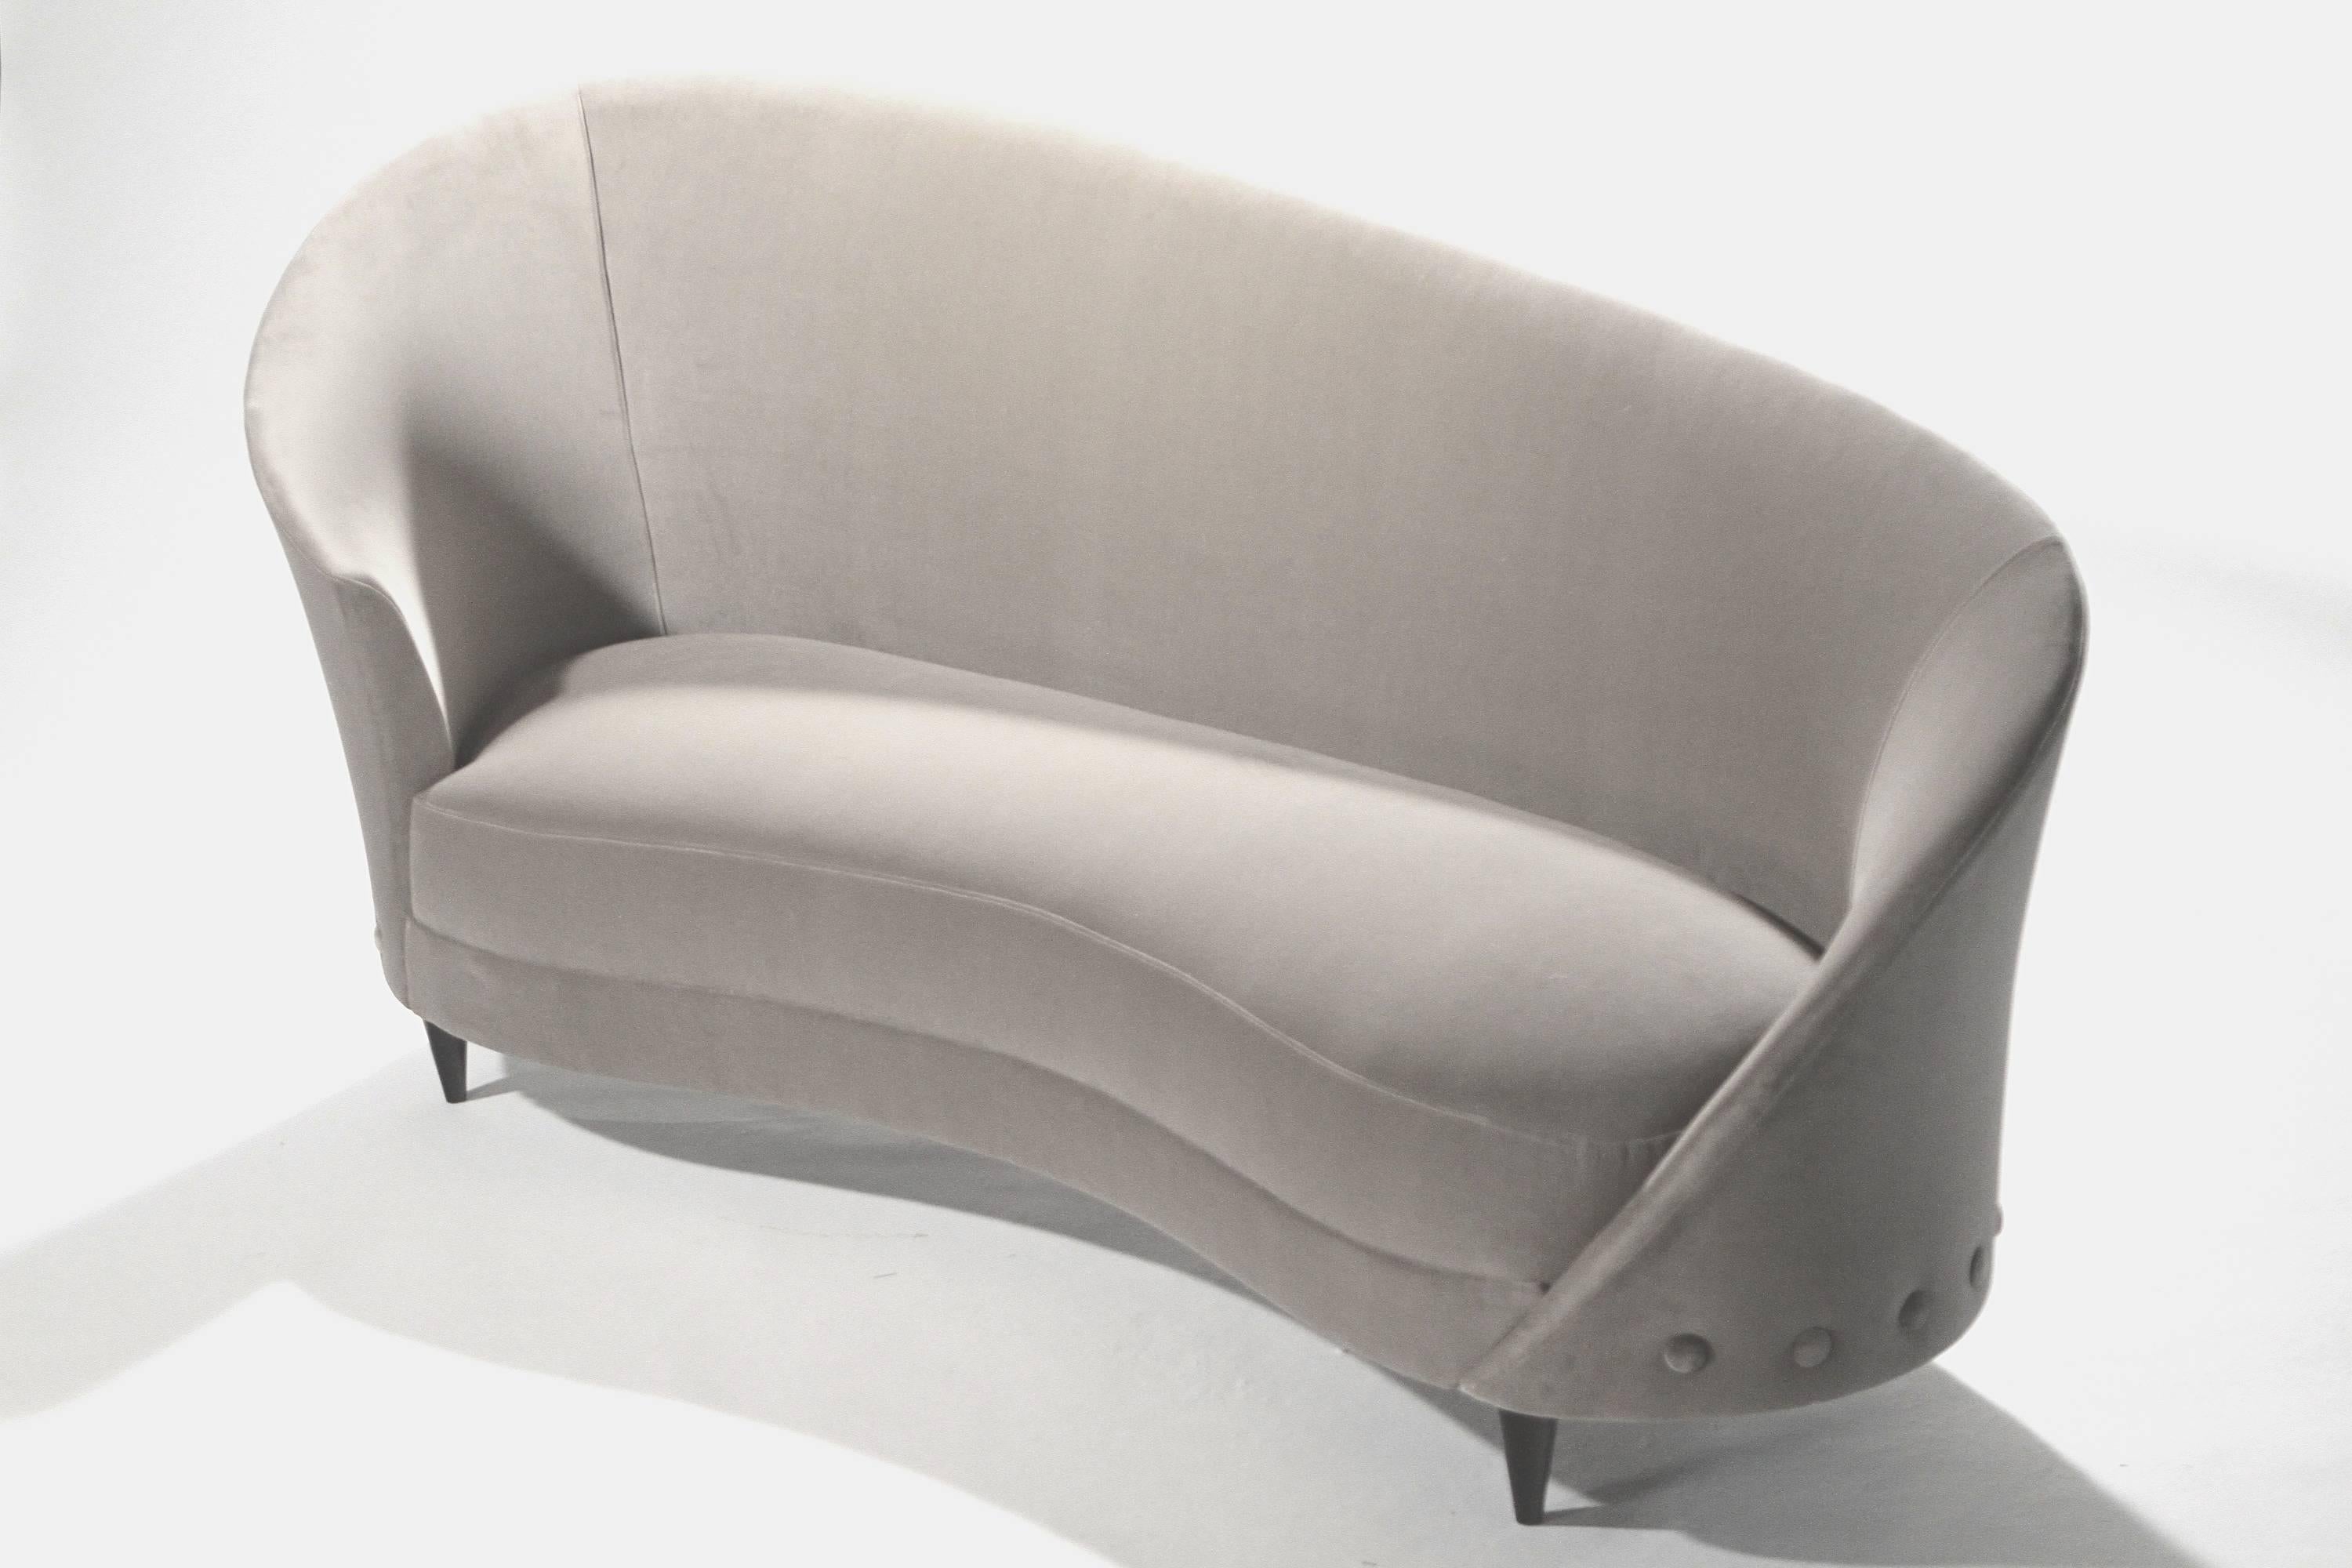 A rounded, sloped back gives this piece a jolt of midcentury glamour. Attributed to Italian designer Federico Munari, the sofa seems to belong in some glitzy, 1960s boudoir. However, the new trendy grey upholstery in soft velvet has made this piece